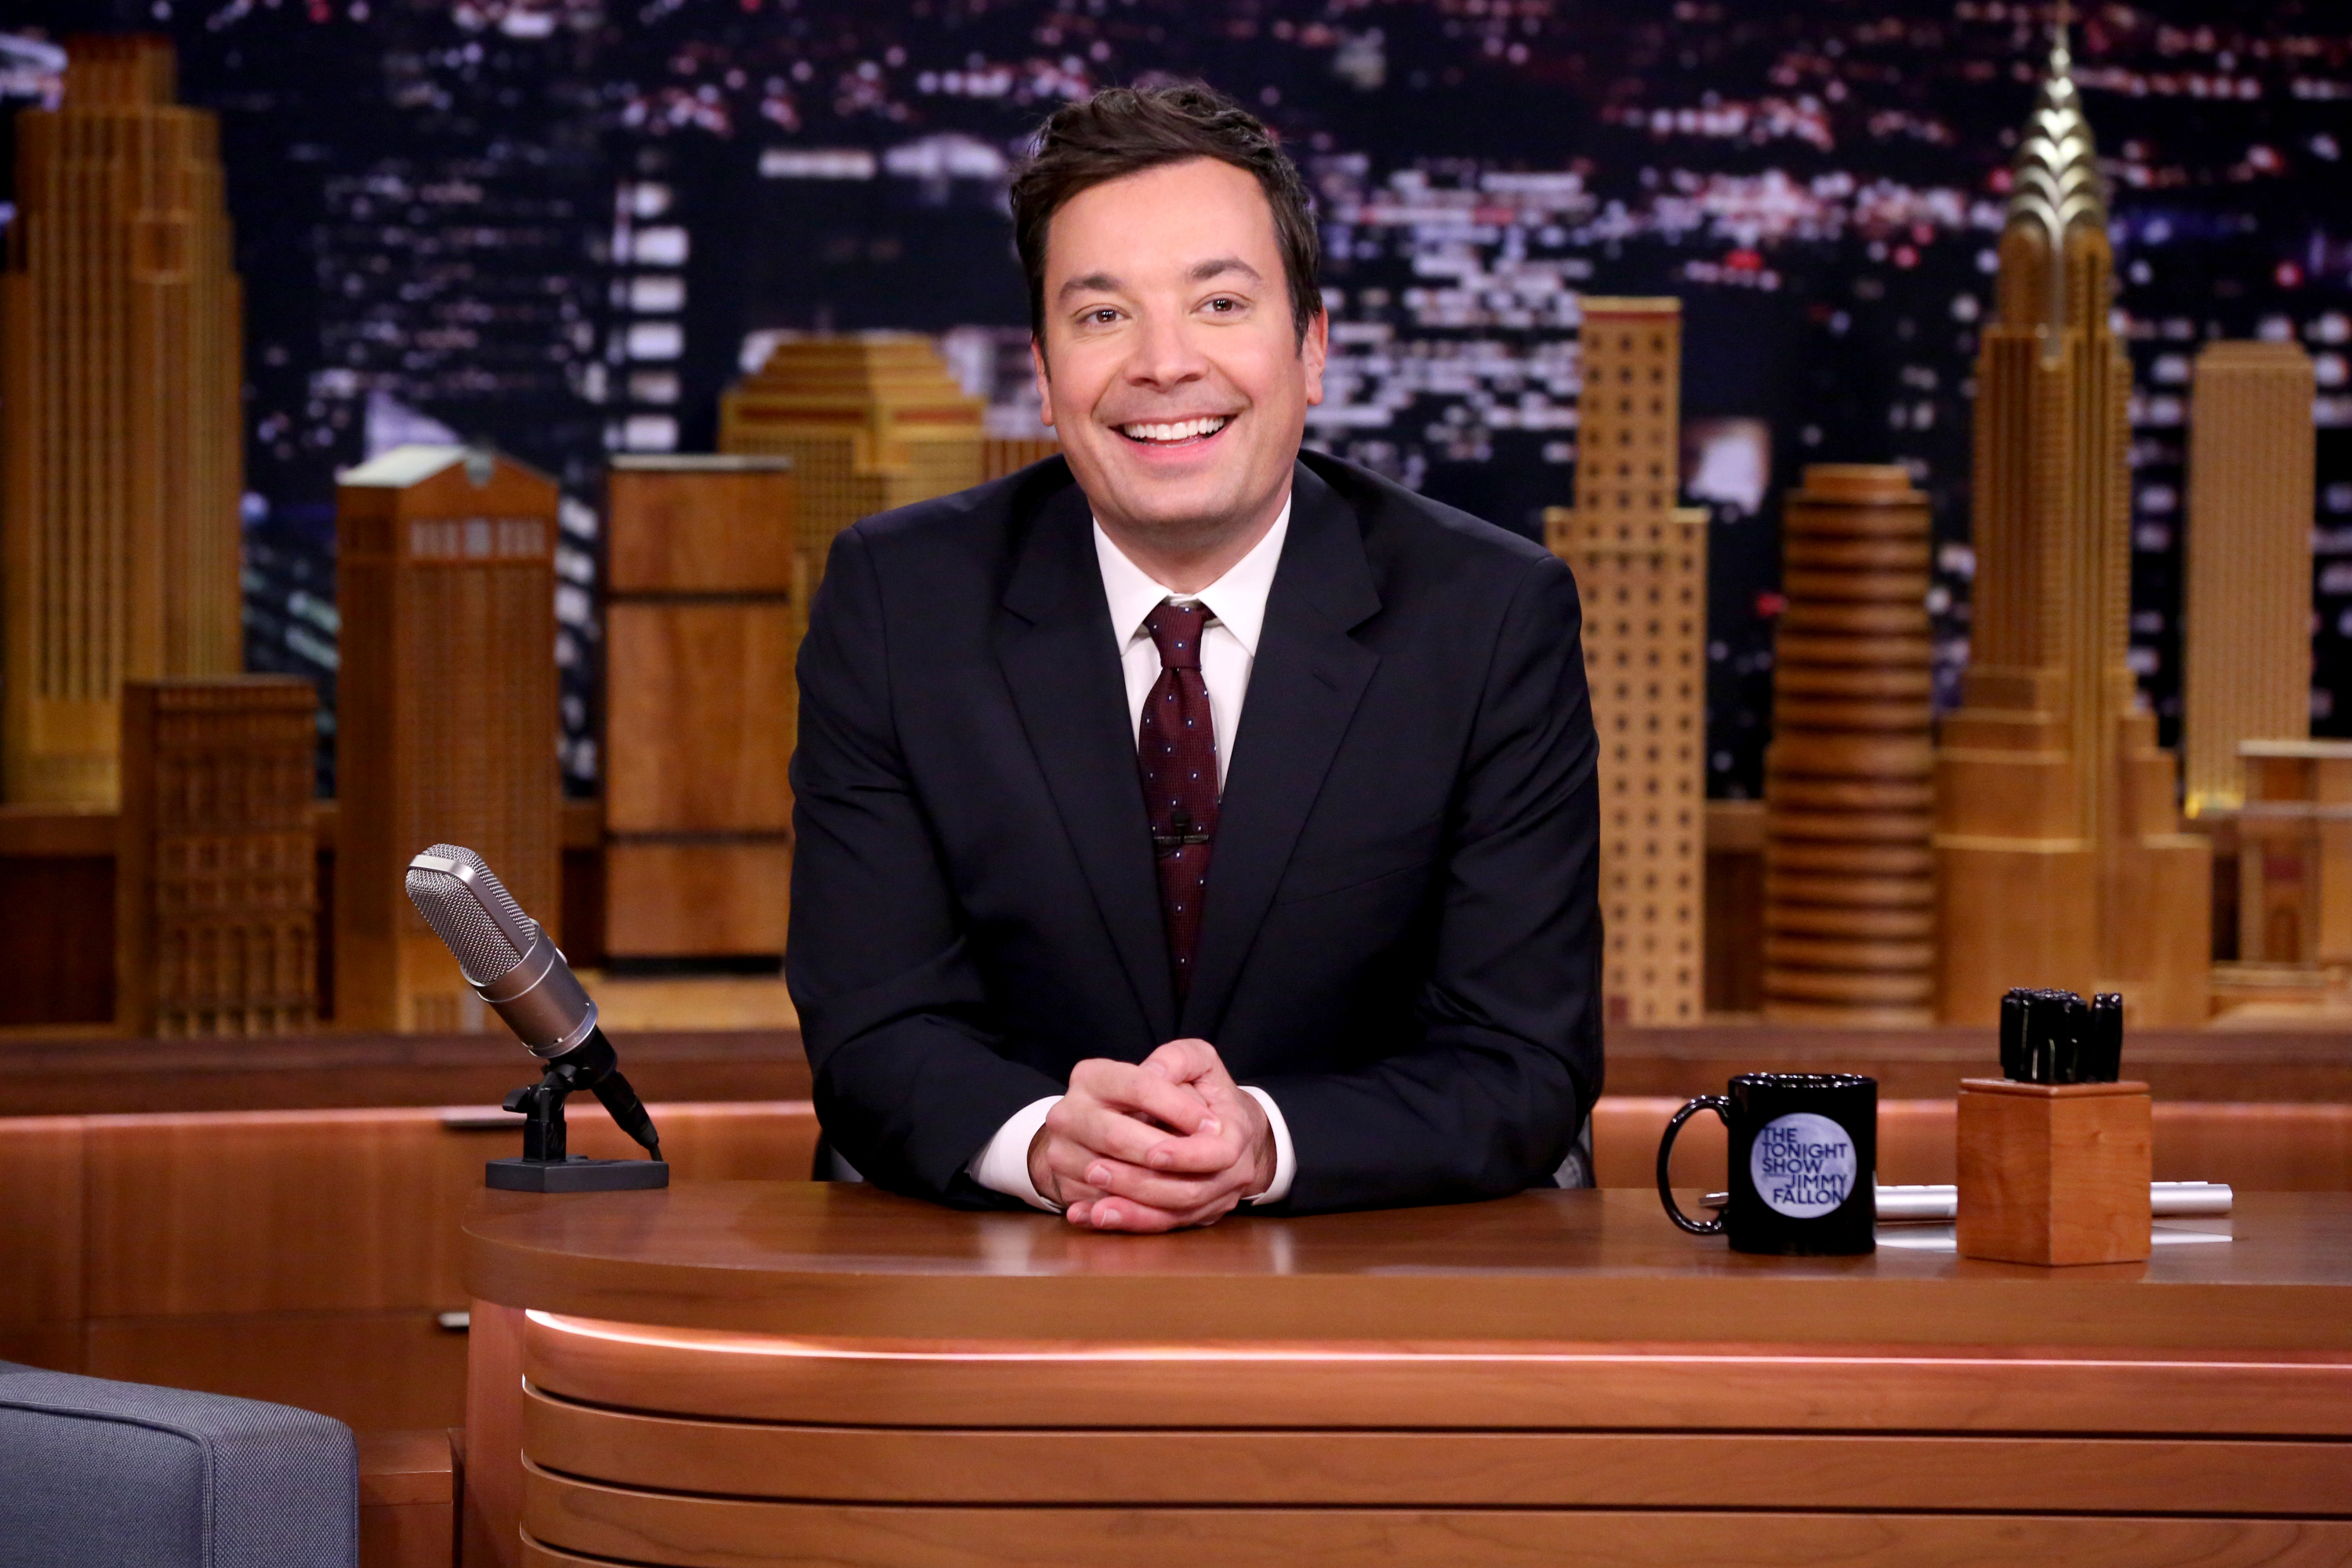 Jimmy Fallon smiles as he sits at his desk during his late night show